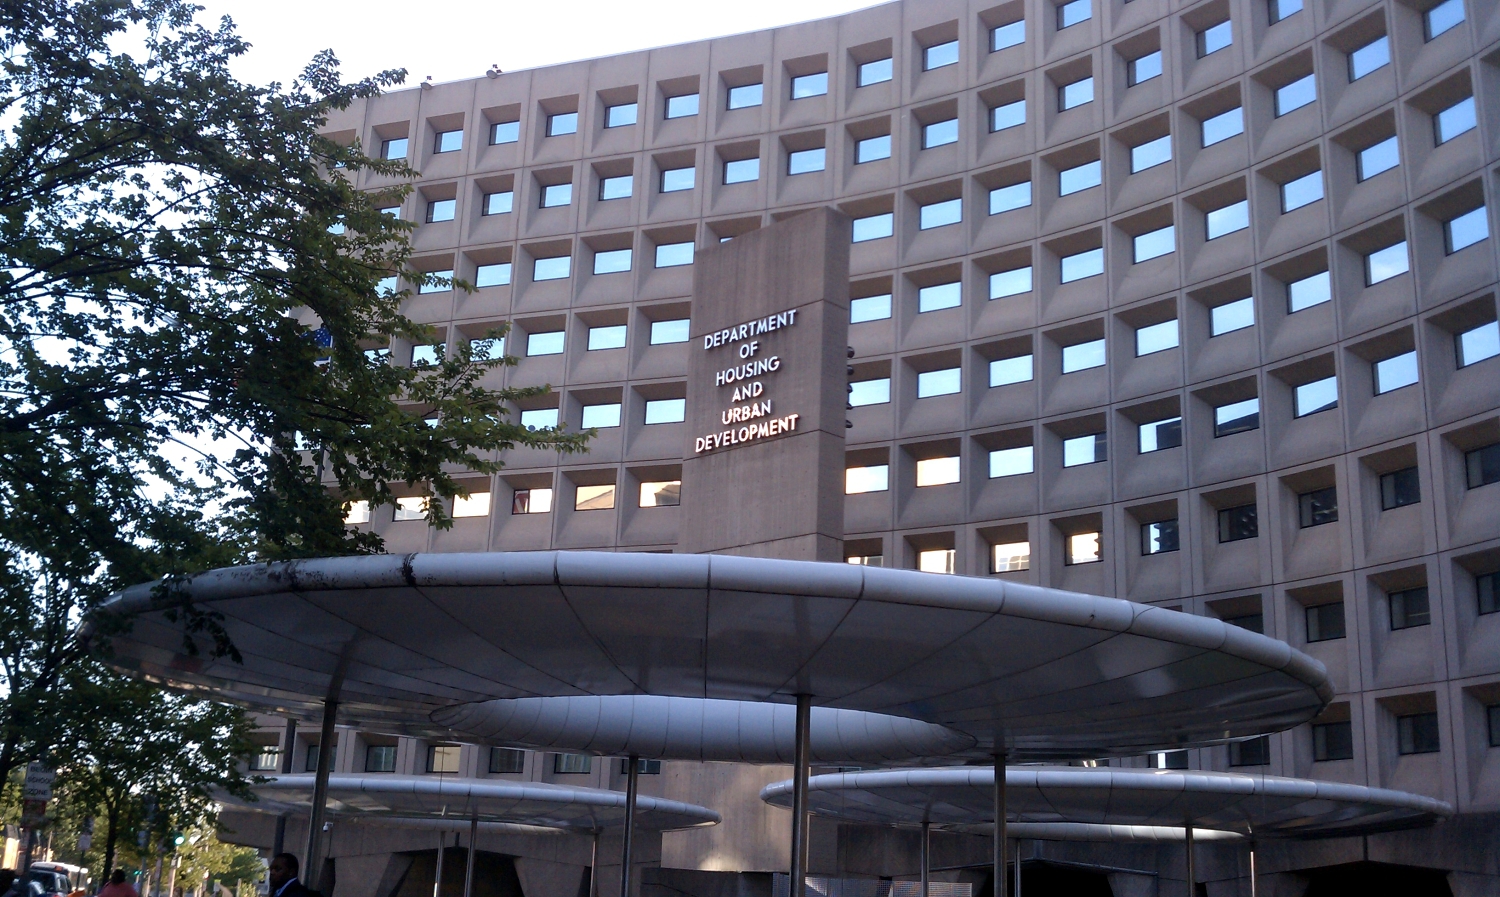 The Department of Housing and Urban Development headquarters